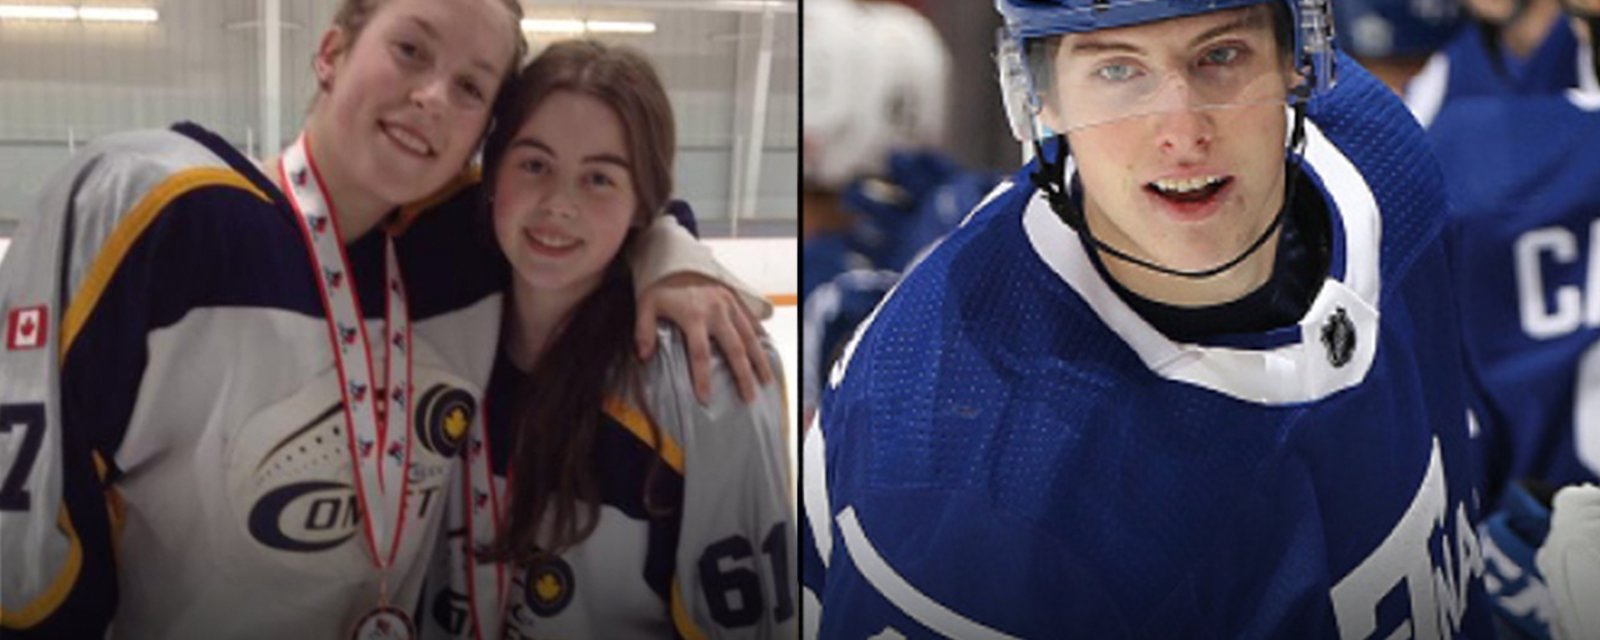 Good Guy Alert: Marner donates time and money for rink renovations in Fort Hope, Ontario